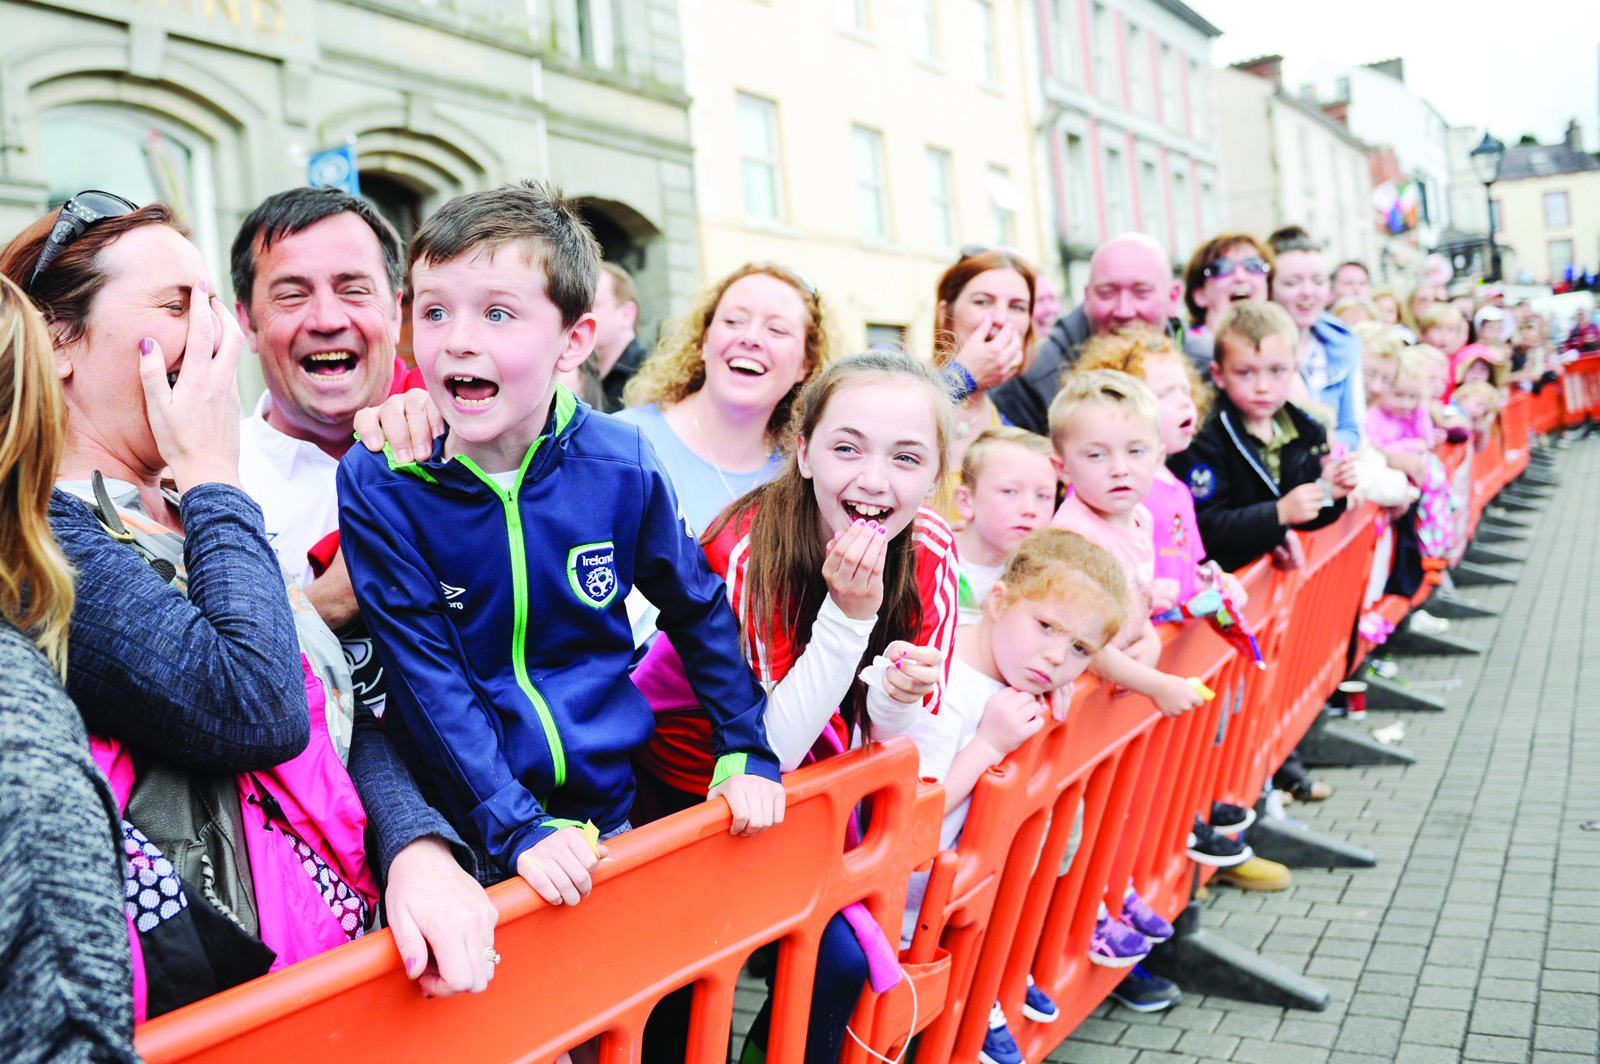 James McManus cheering on his pig at the pig racing at the Clones Canal Festival. Â©Rory Geary/The Northern Standard